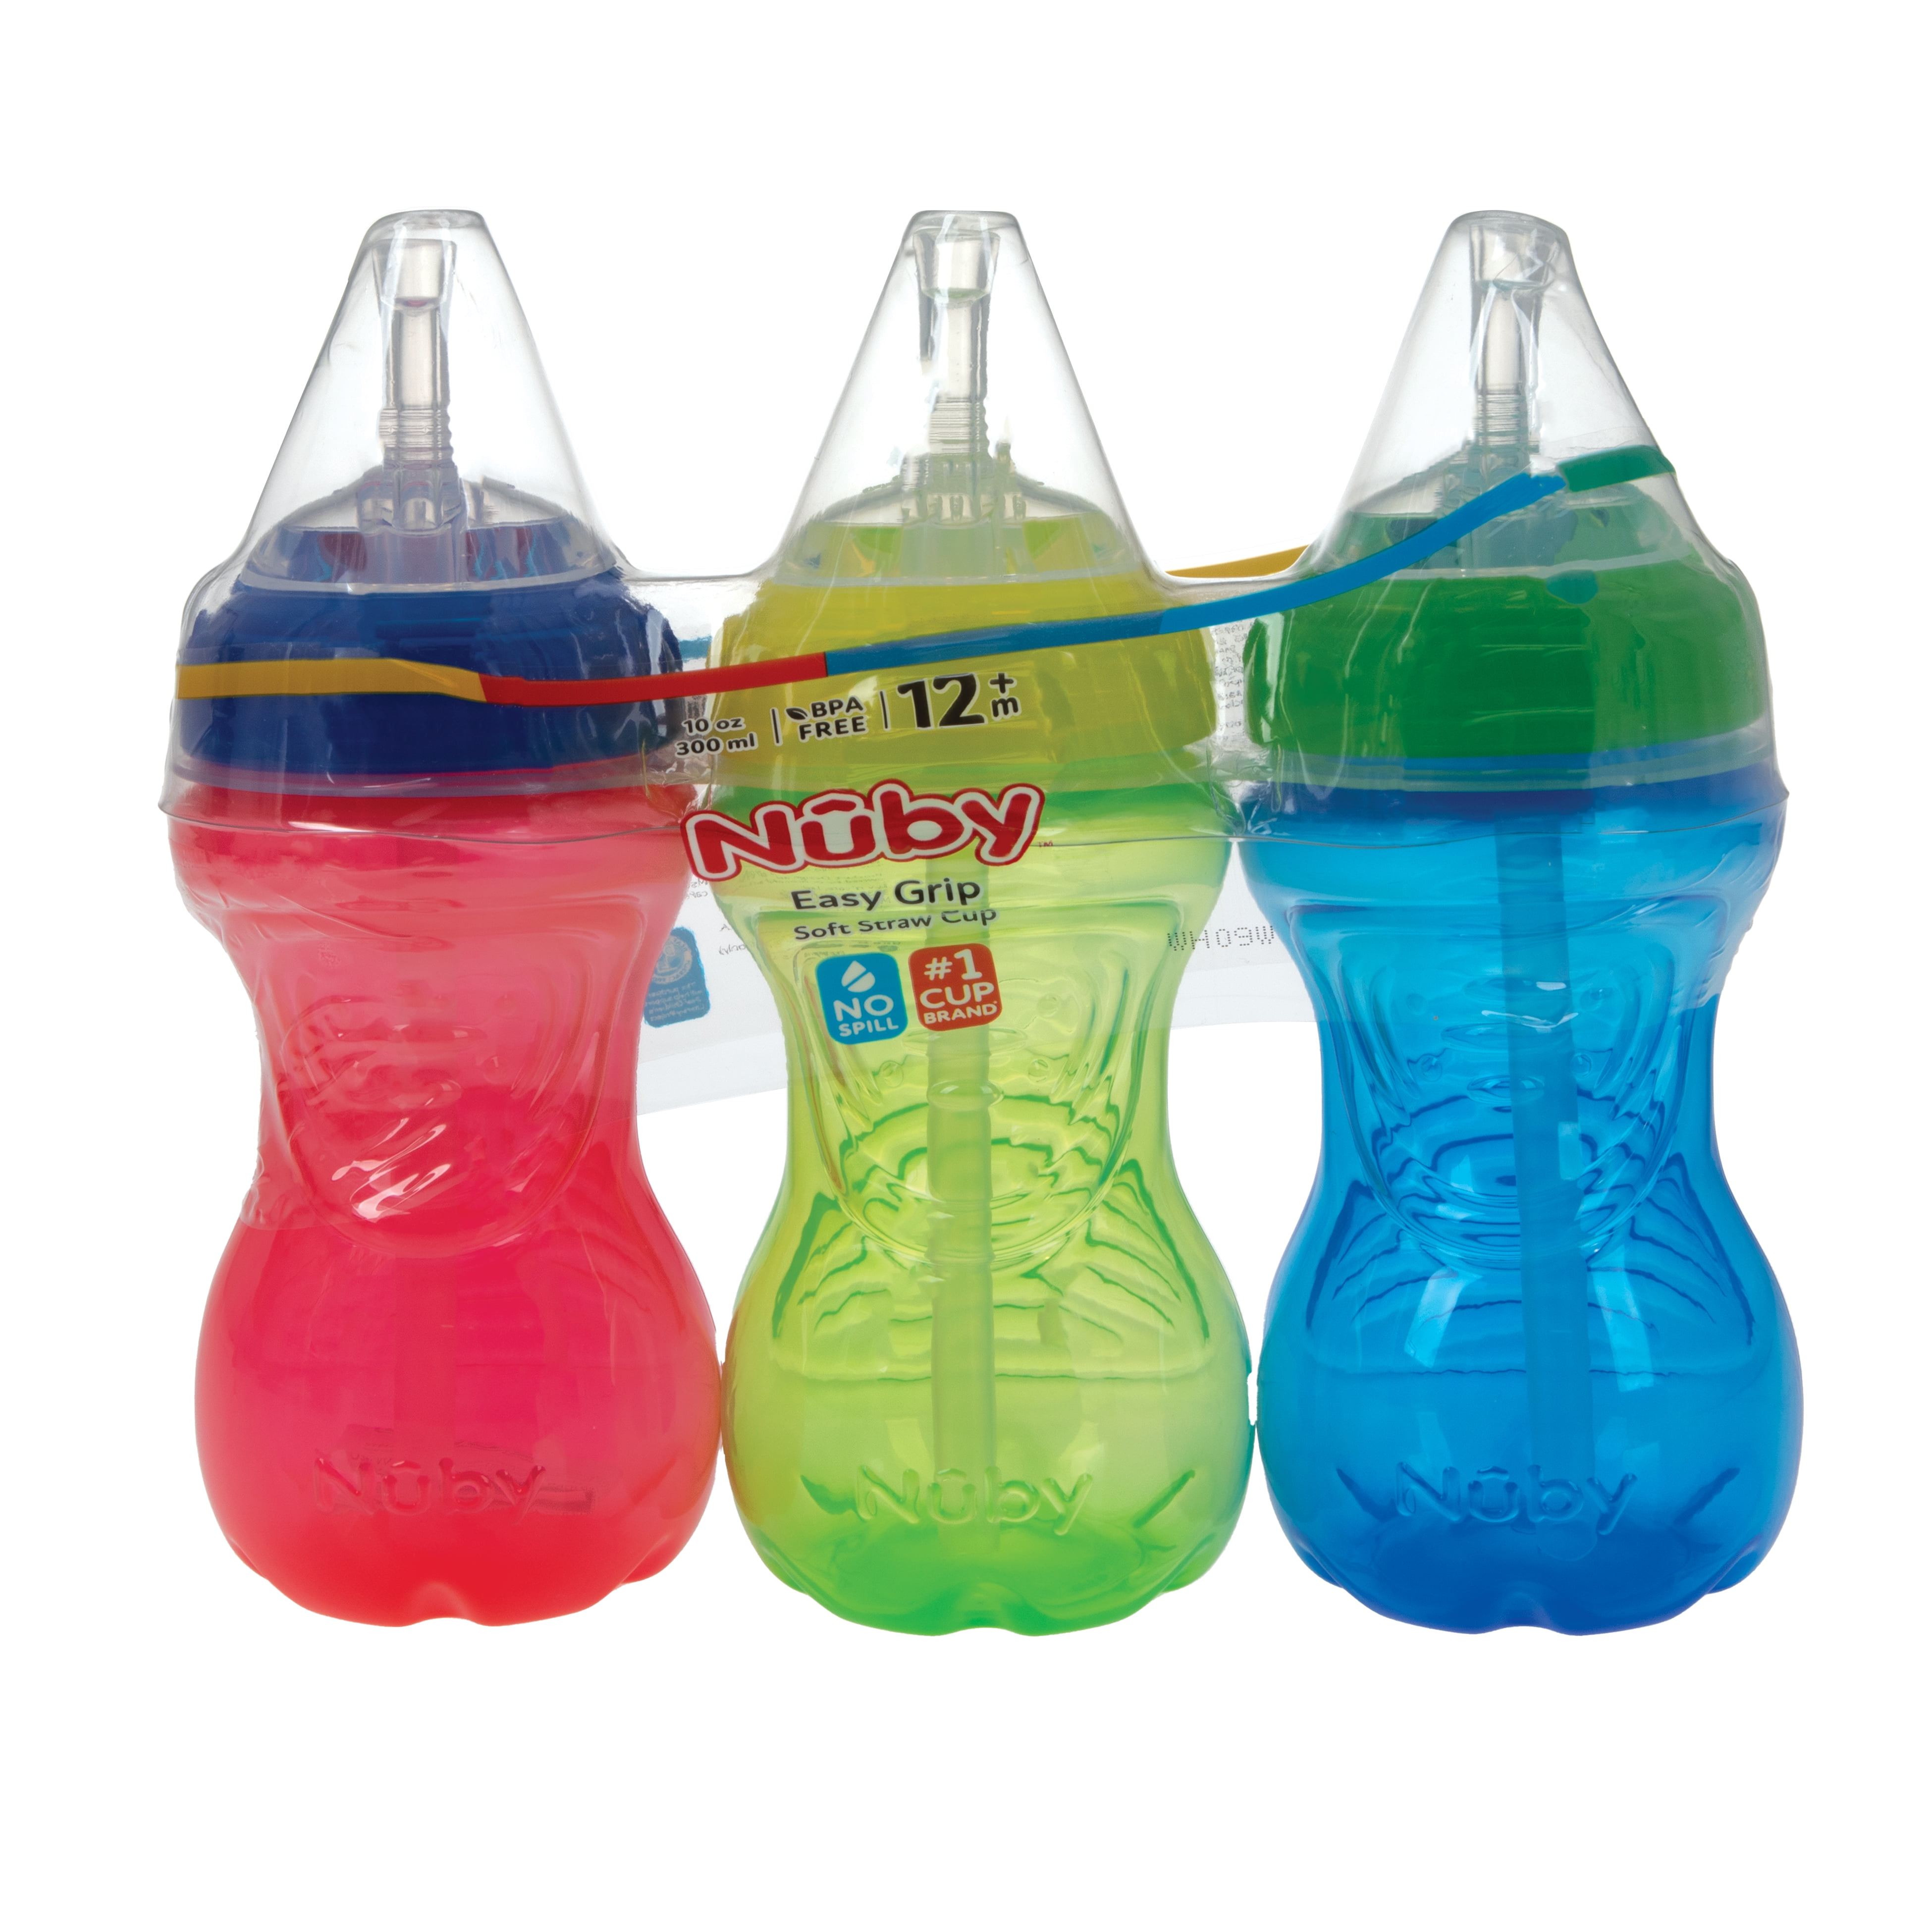 Nuby No-Spill Cup with Flex Straw, Neutral, 10 Ounce (Pack of 3)